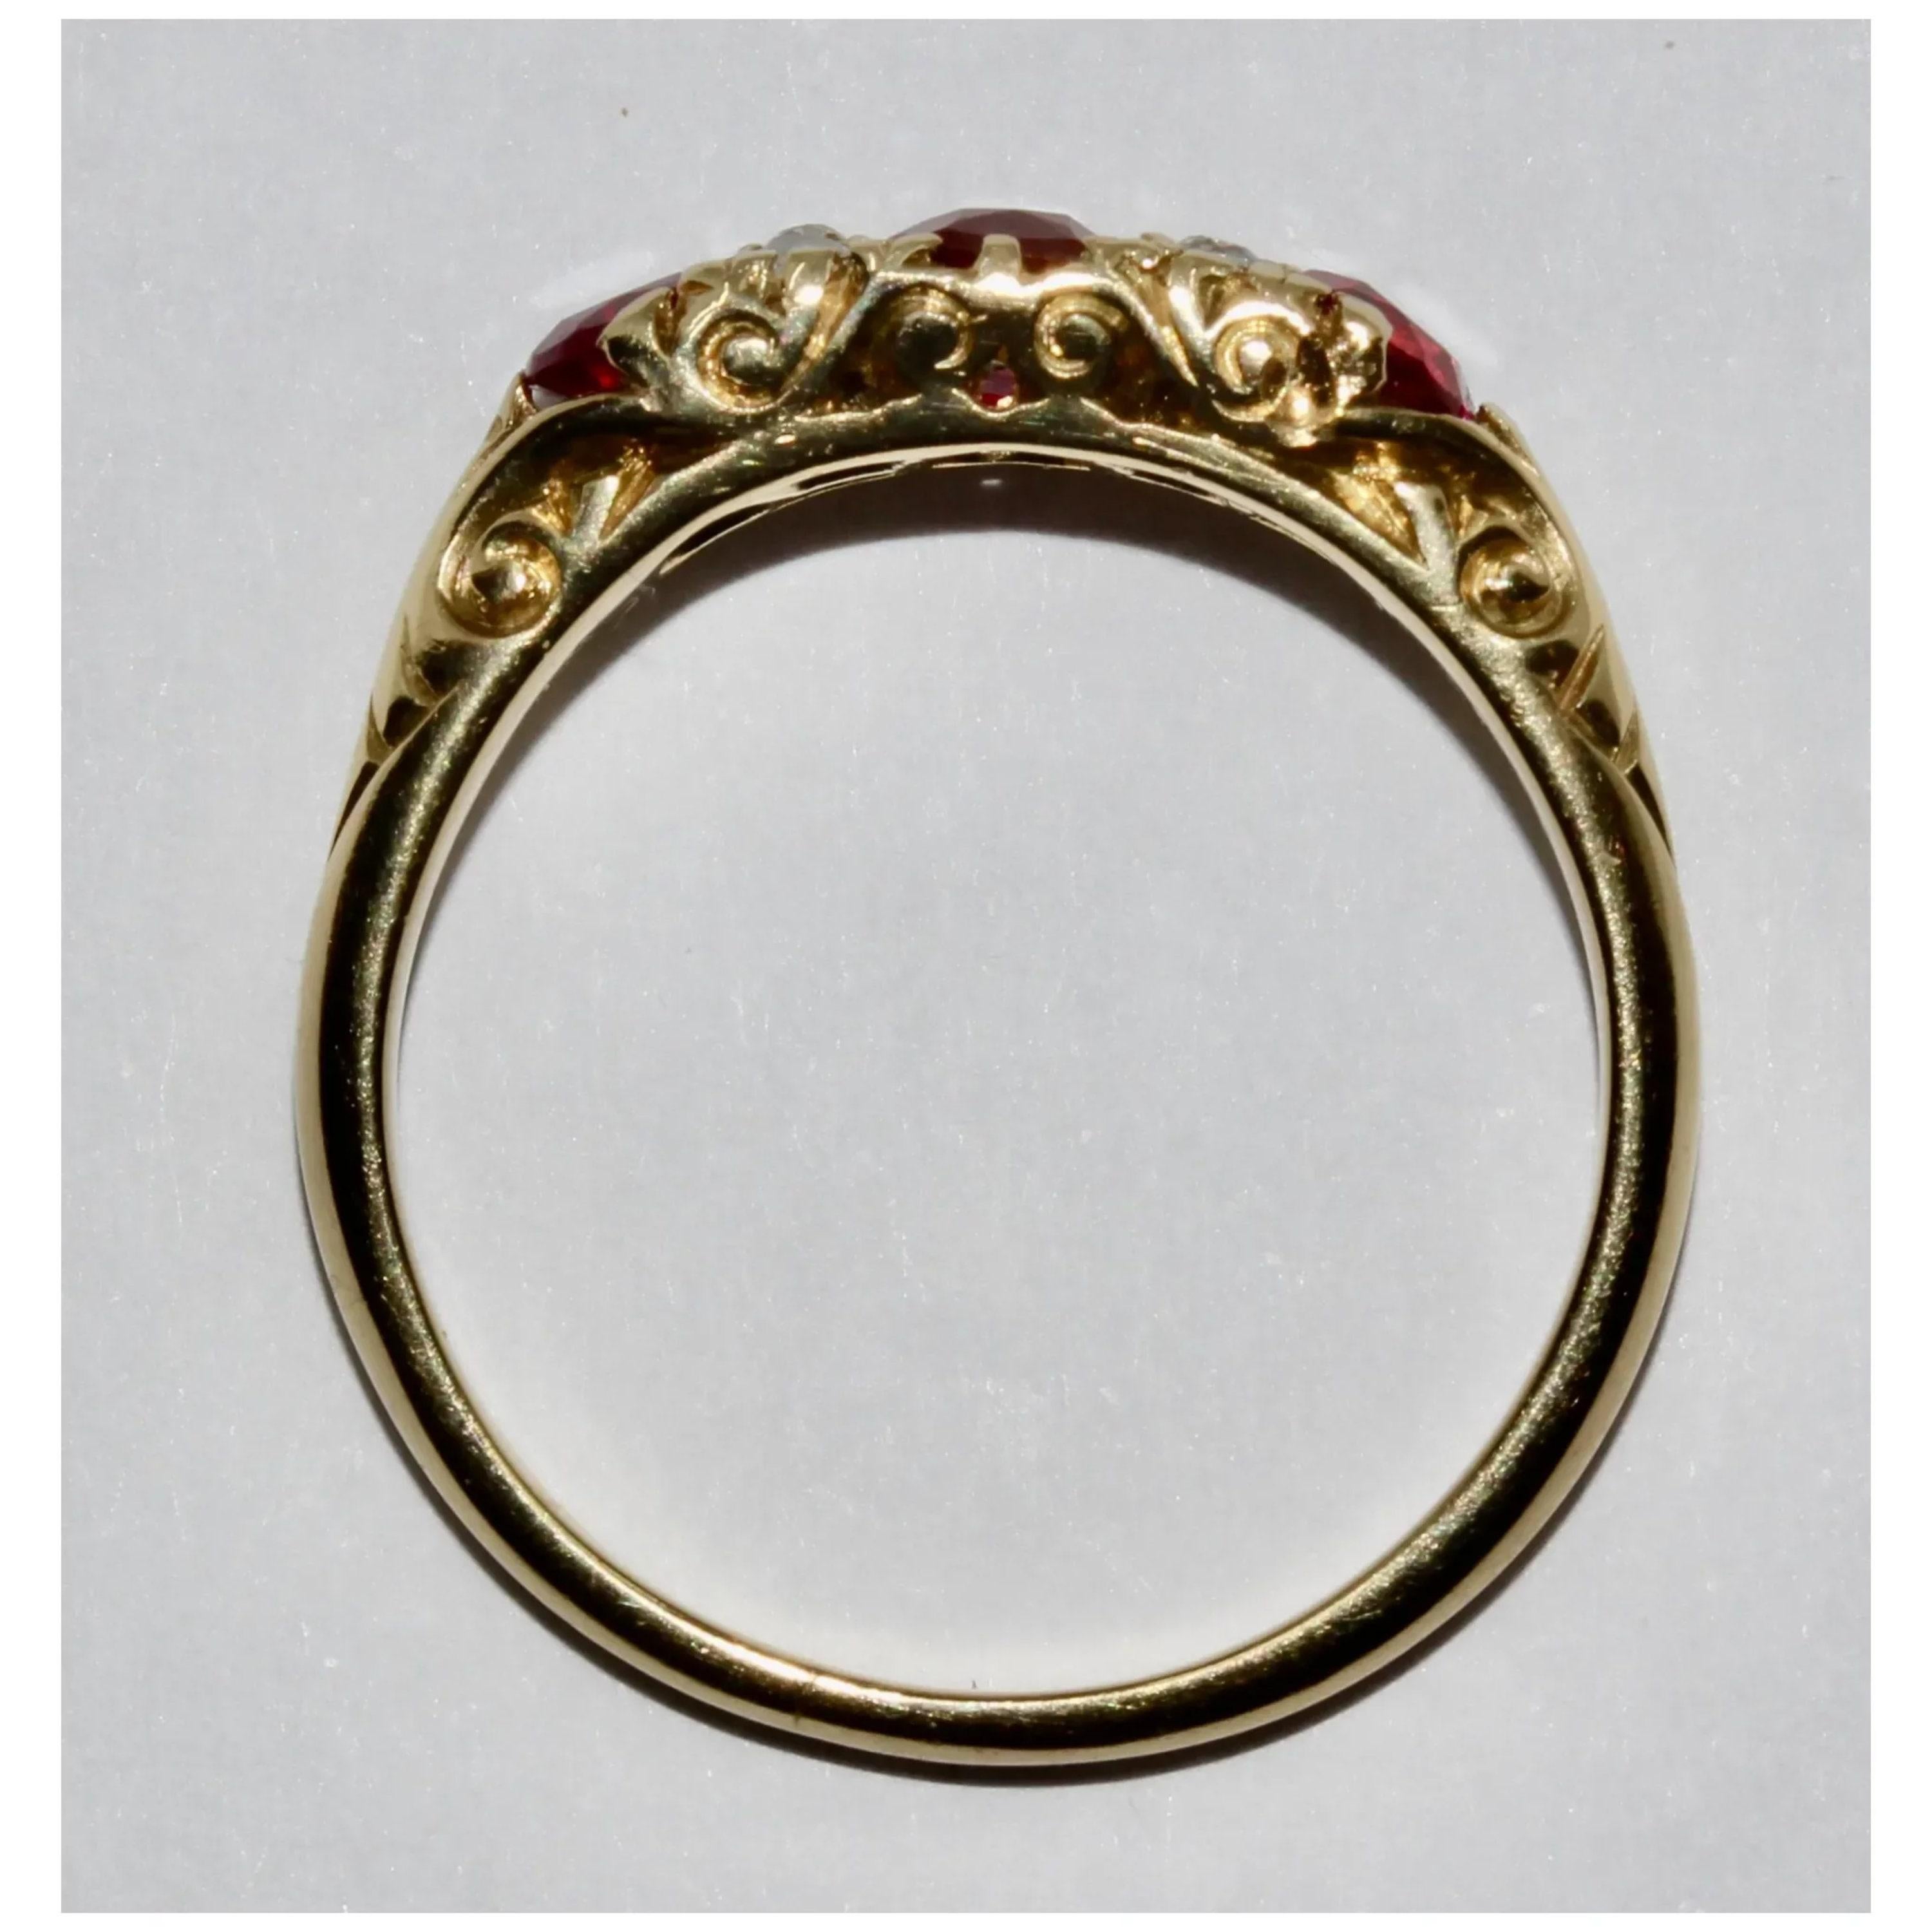 For Sale:  2 Carat Natural Ruby Diamond Engagement Ring Set in 18K Gold, Fashion Ring 4